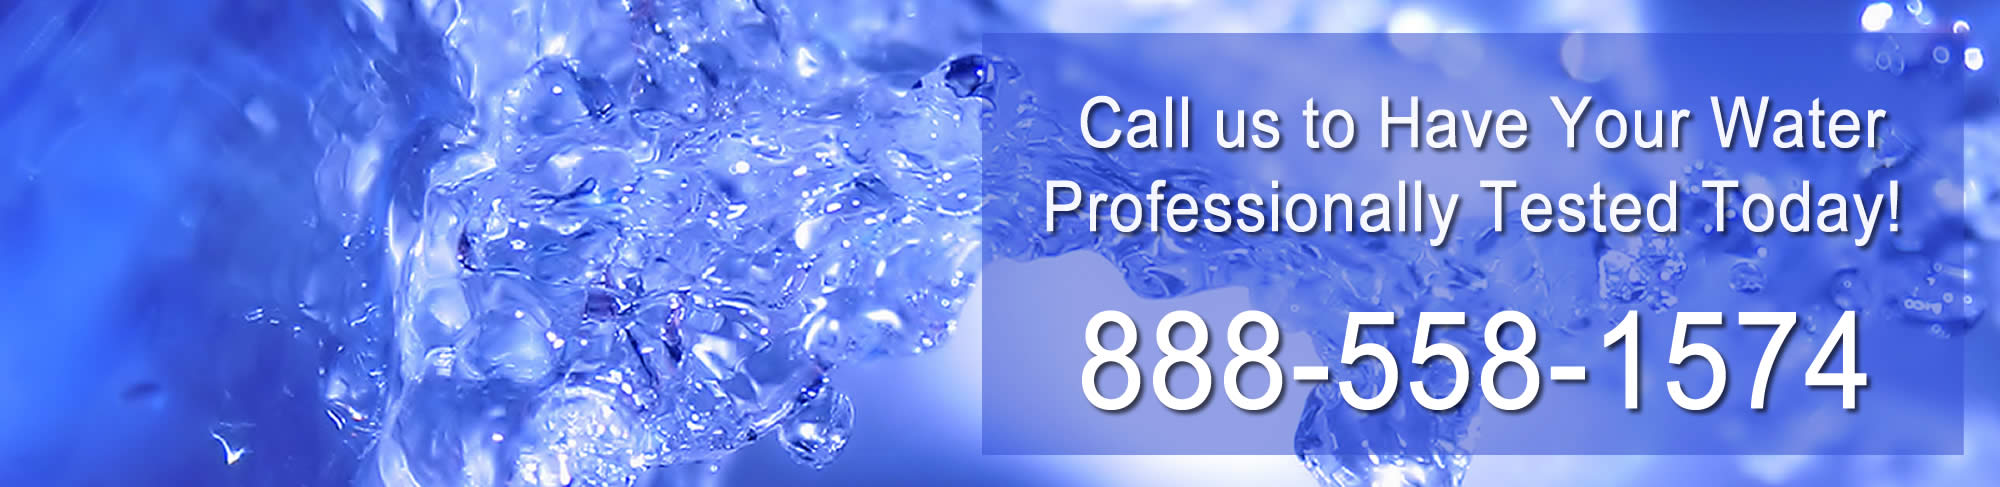 Specializing in Lebanon CT Water Testing and Analysis